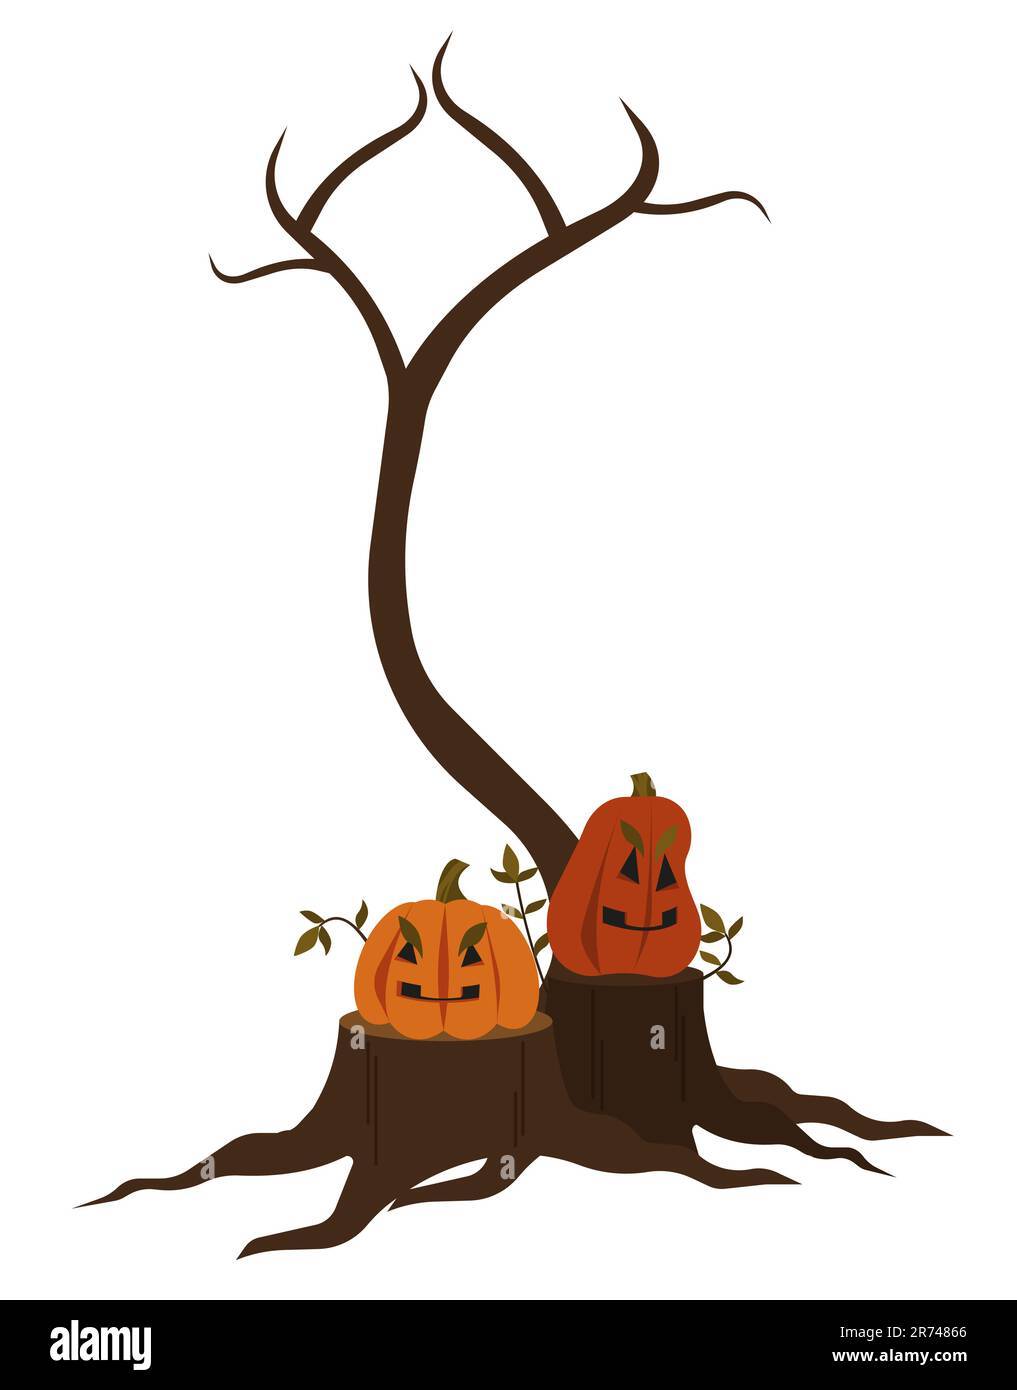 Pumpkins on stumps, autumn tree without leaves. Isolated halloween object on white background. Flat design vector illustration. Stock Vector